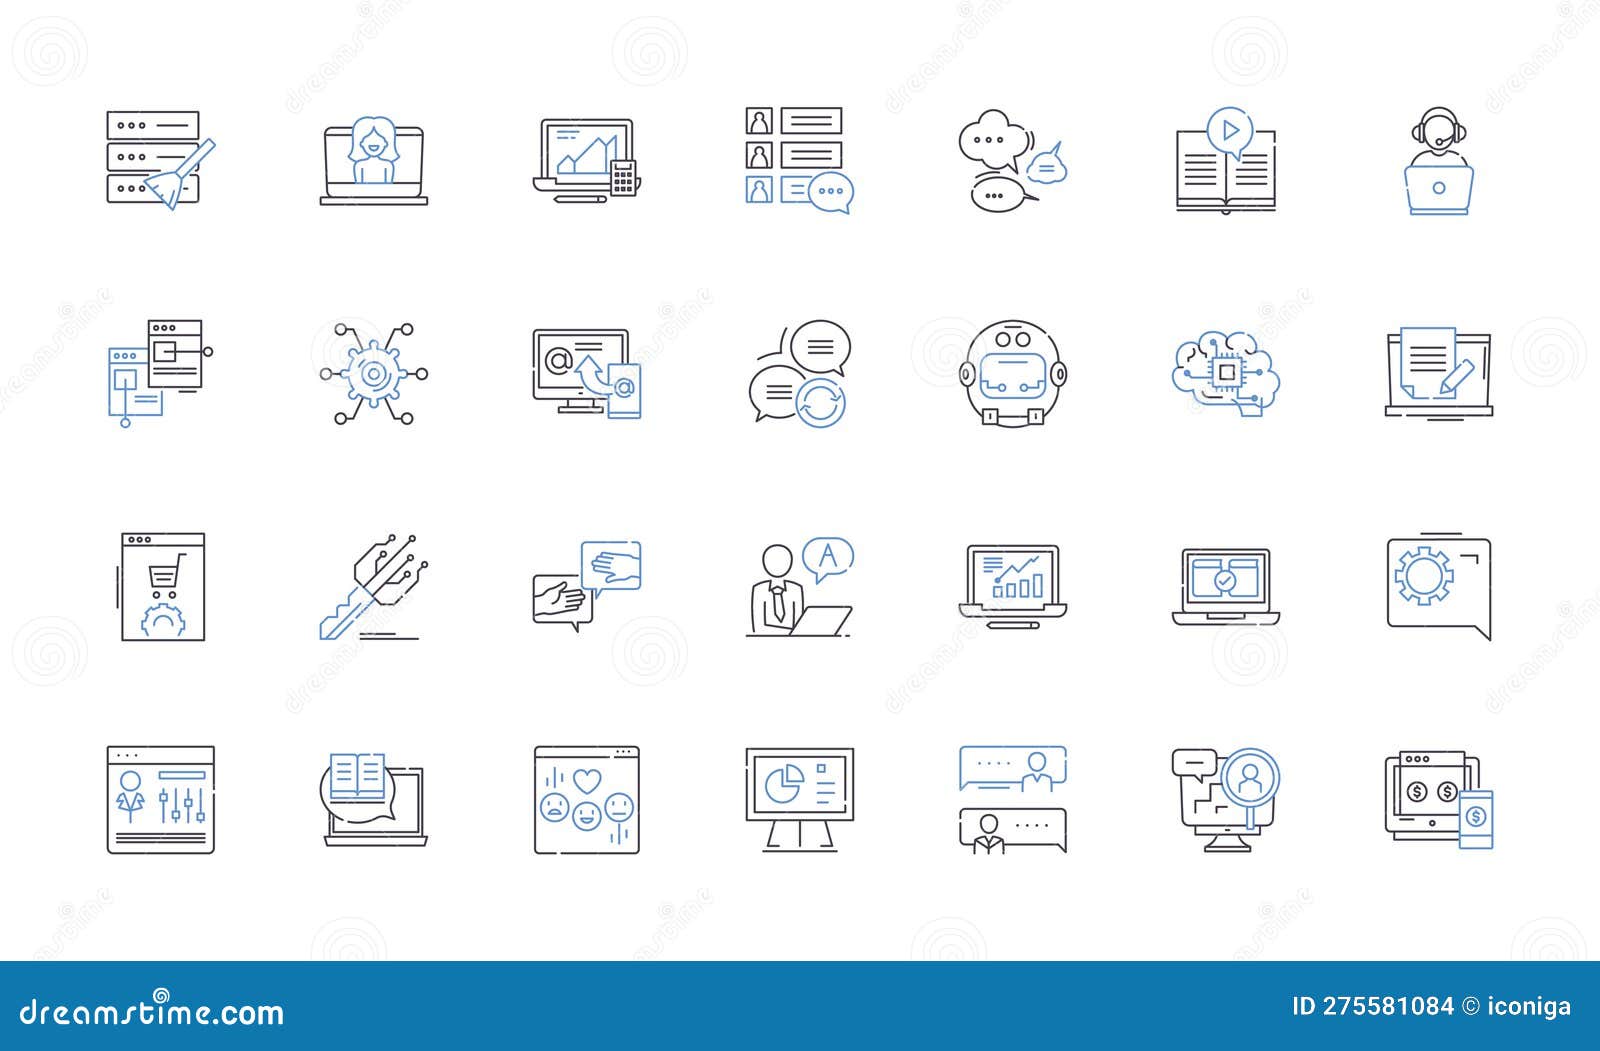 teaching line icons collection. educate, instruct, tutor, learn, mentor, guide, train  and linear 